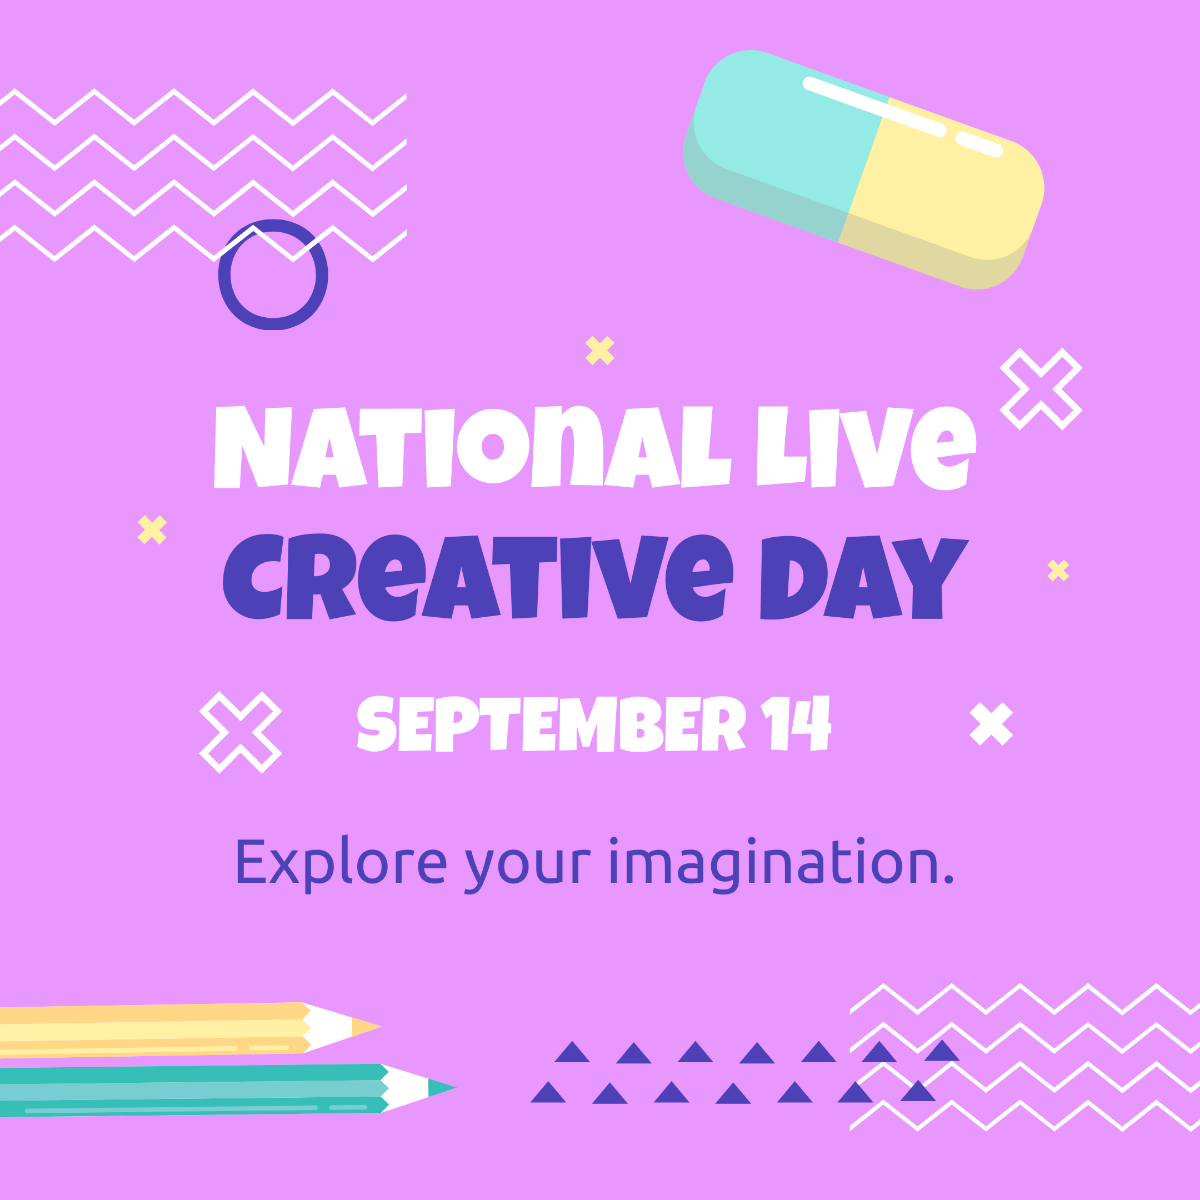 National Live Creative Day Instagram Post Template